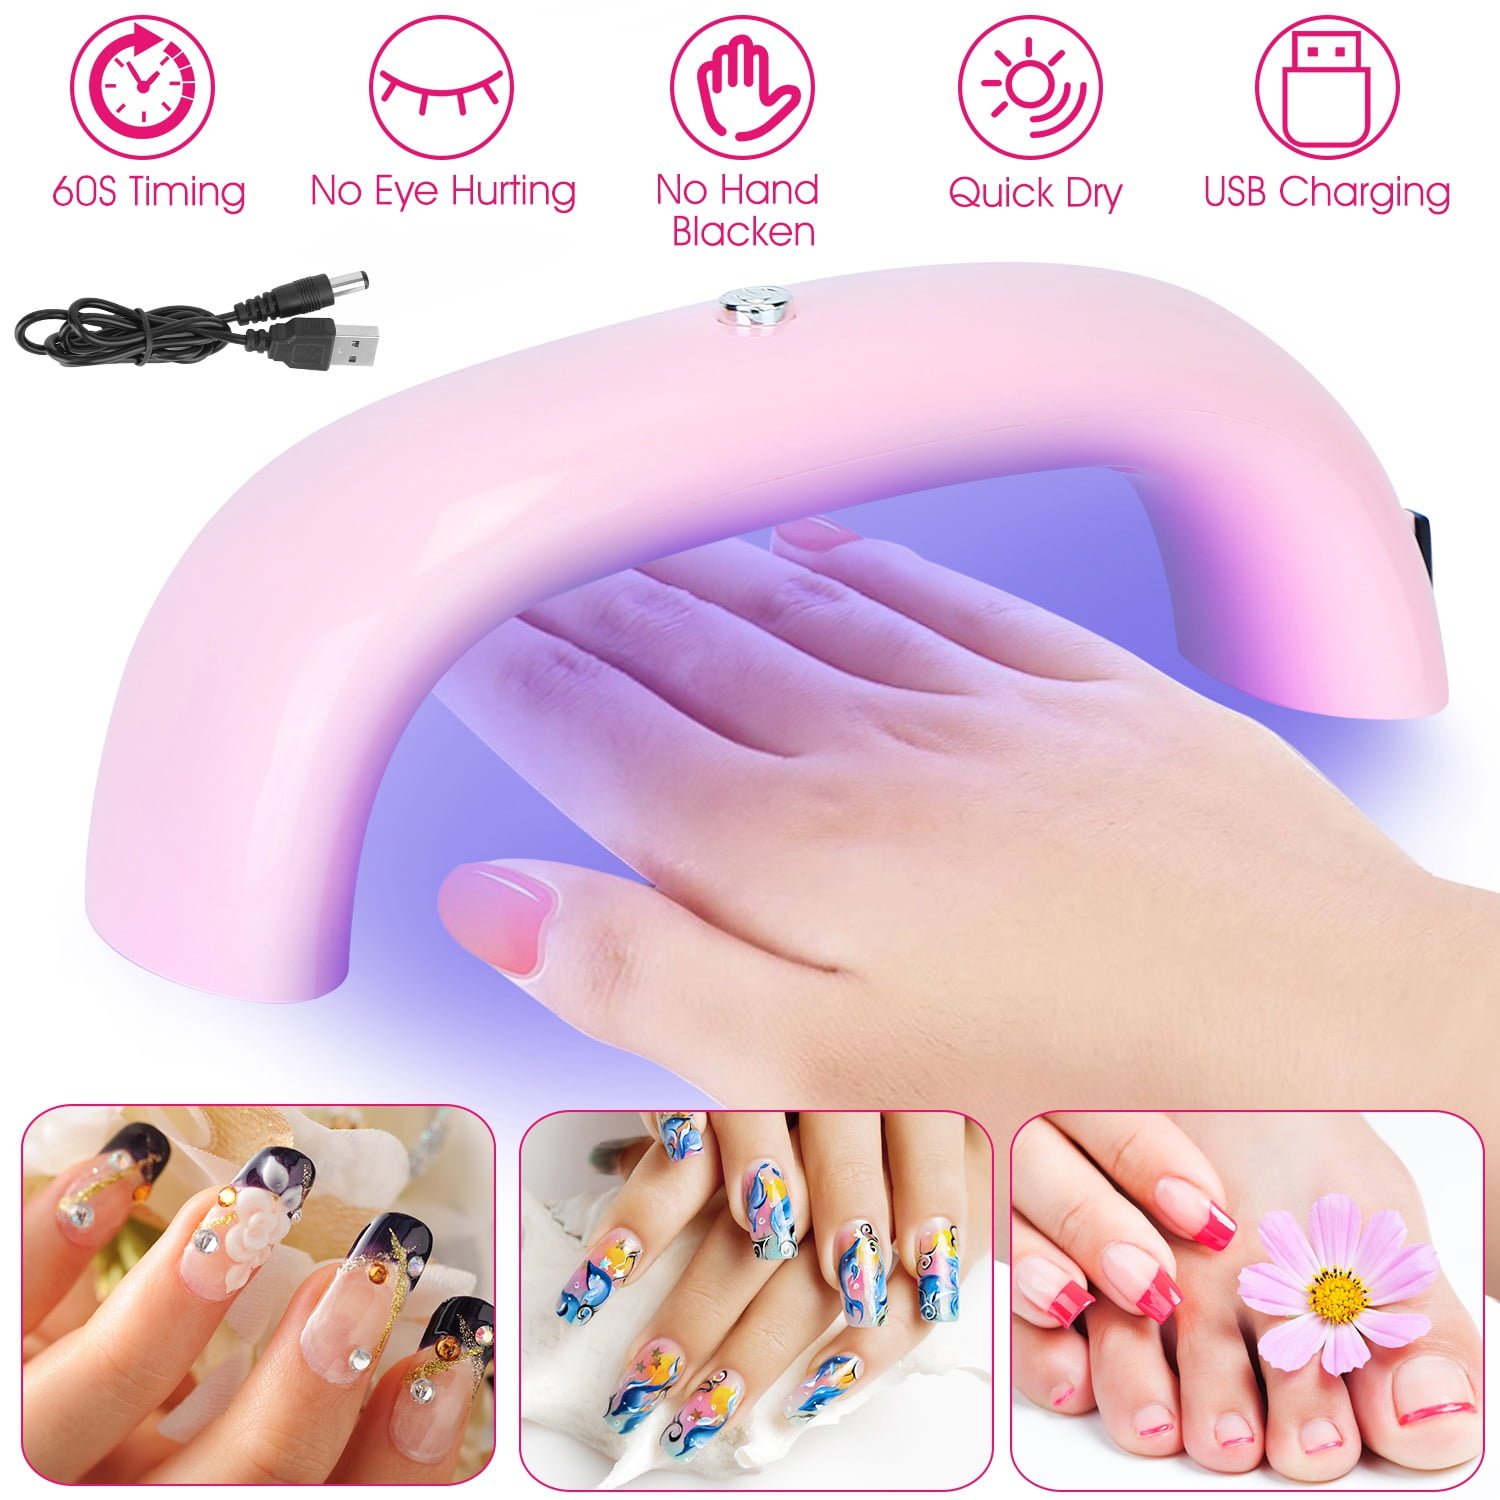 Can a 9w UV lamp cure gel nails?